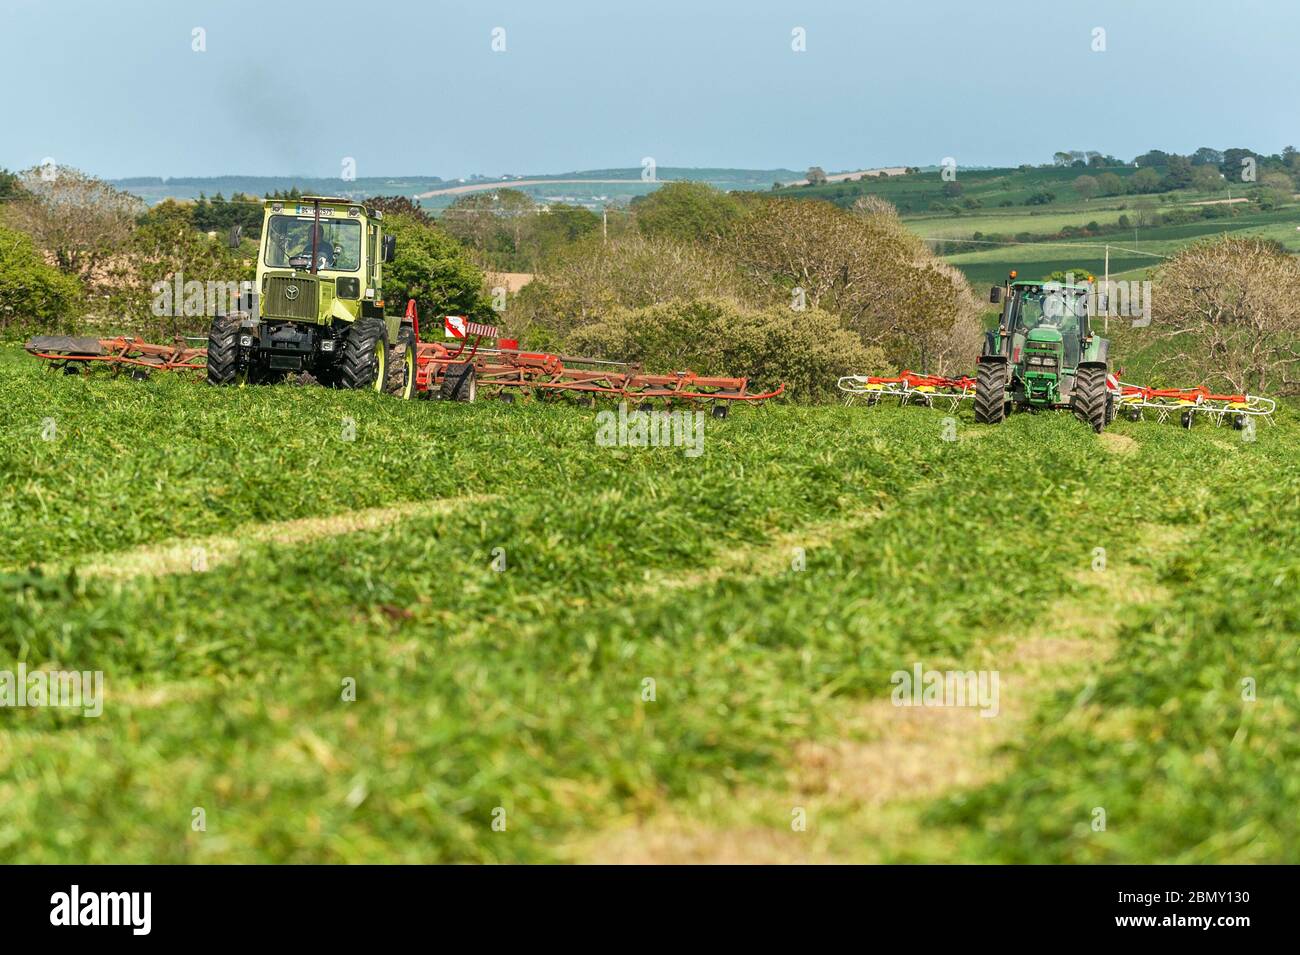 Timoleague, West Cork, Ireland. 11th May, 2020. An MB Trak 900, driven by David Deasy, and John Deere 6620, driven by Kevin Cahalane, towing an SIP 1100 Tedder and Pottinger 900 respectively, aerate grass for silage on the farm of David Deasy of Timoleague. The grass will be bailed tomorrow. Credit: AG News/Alamy Live News Stock Photo